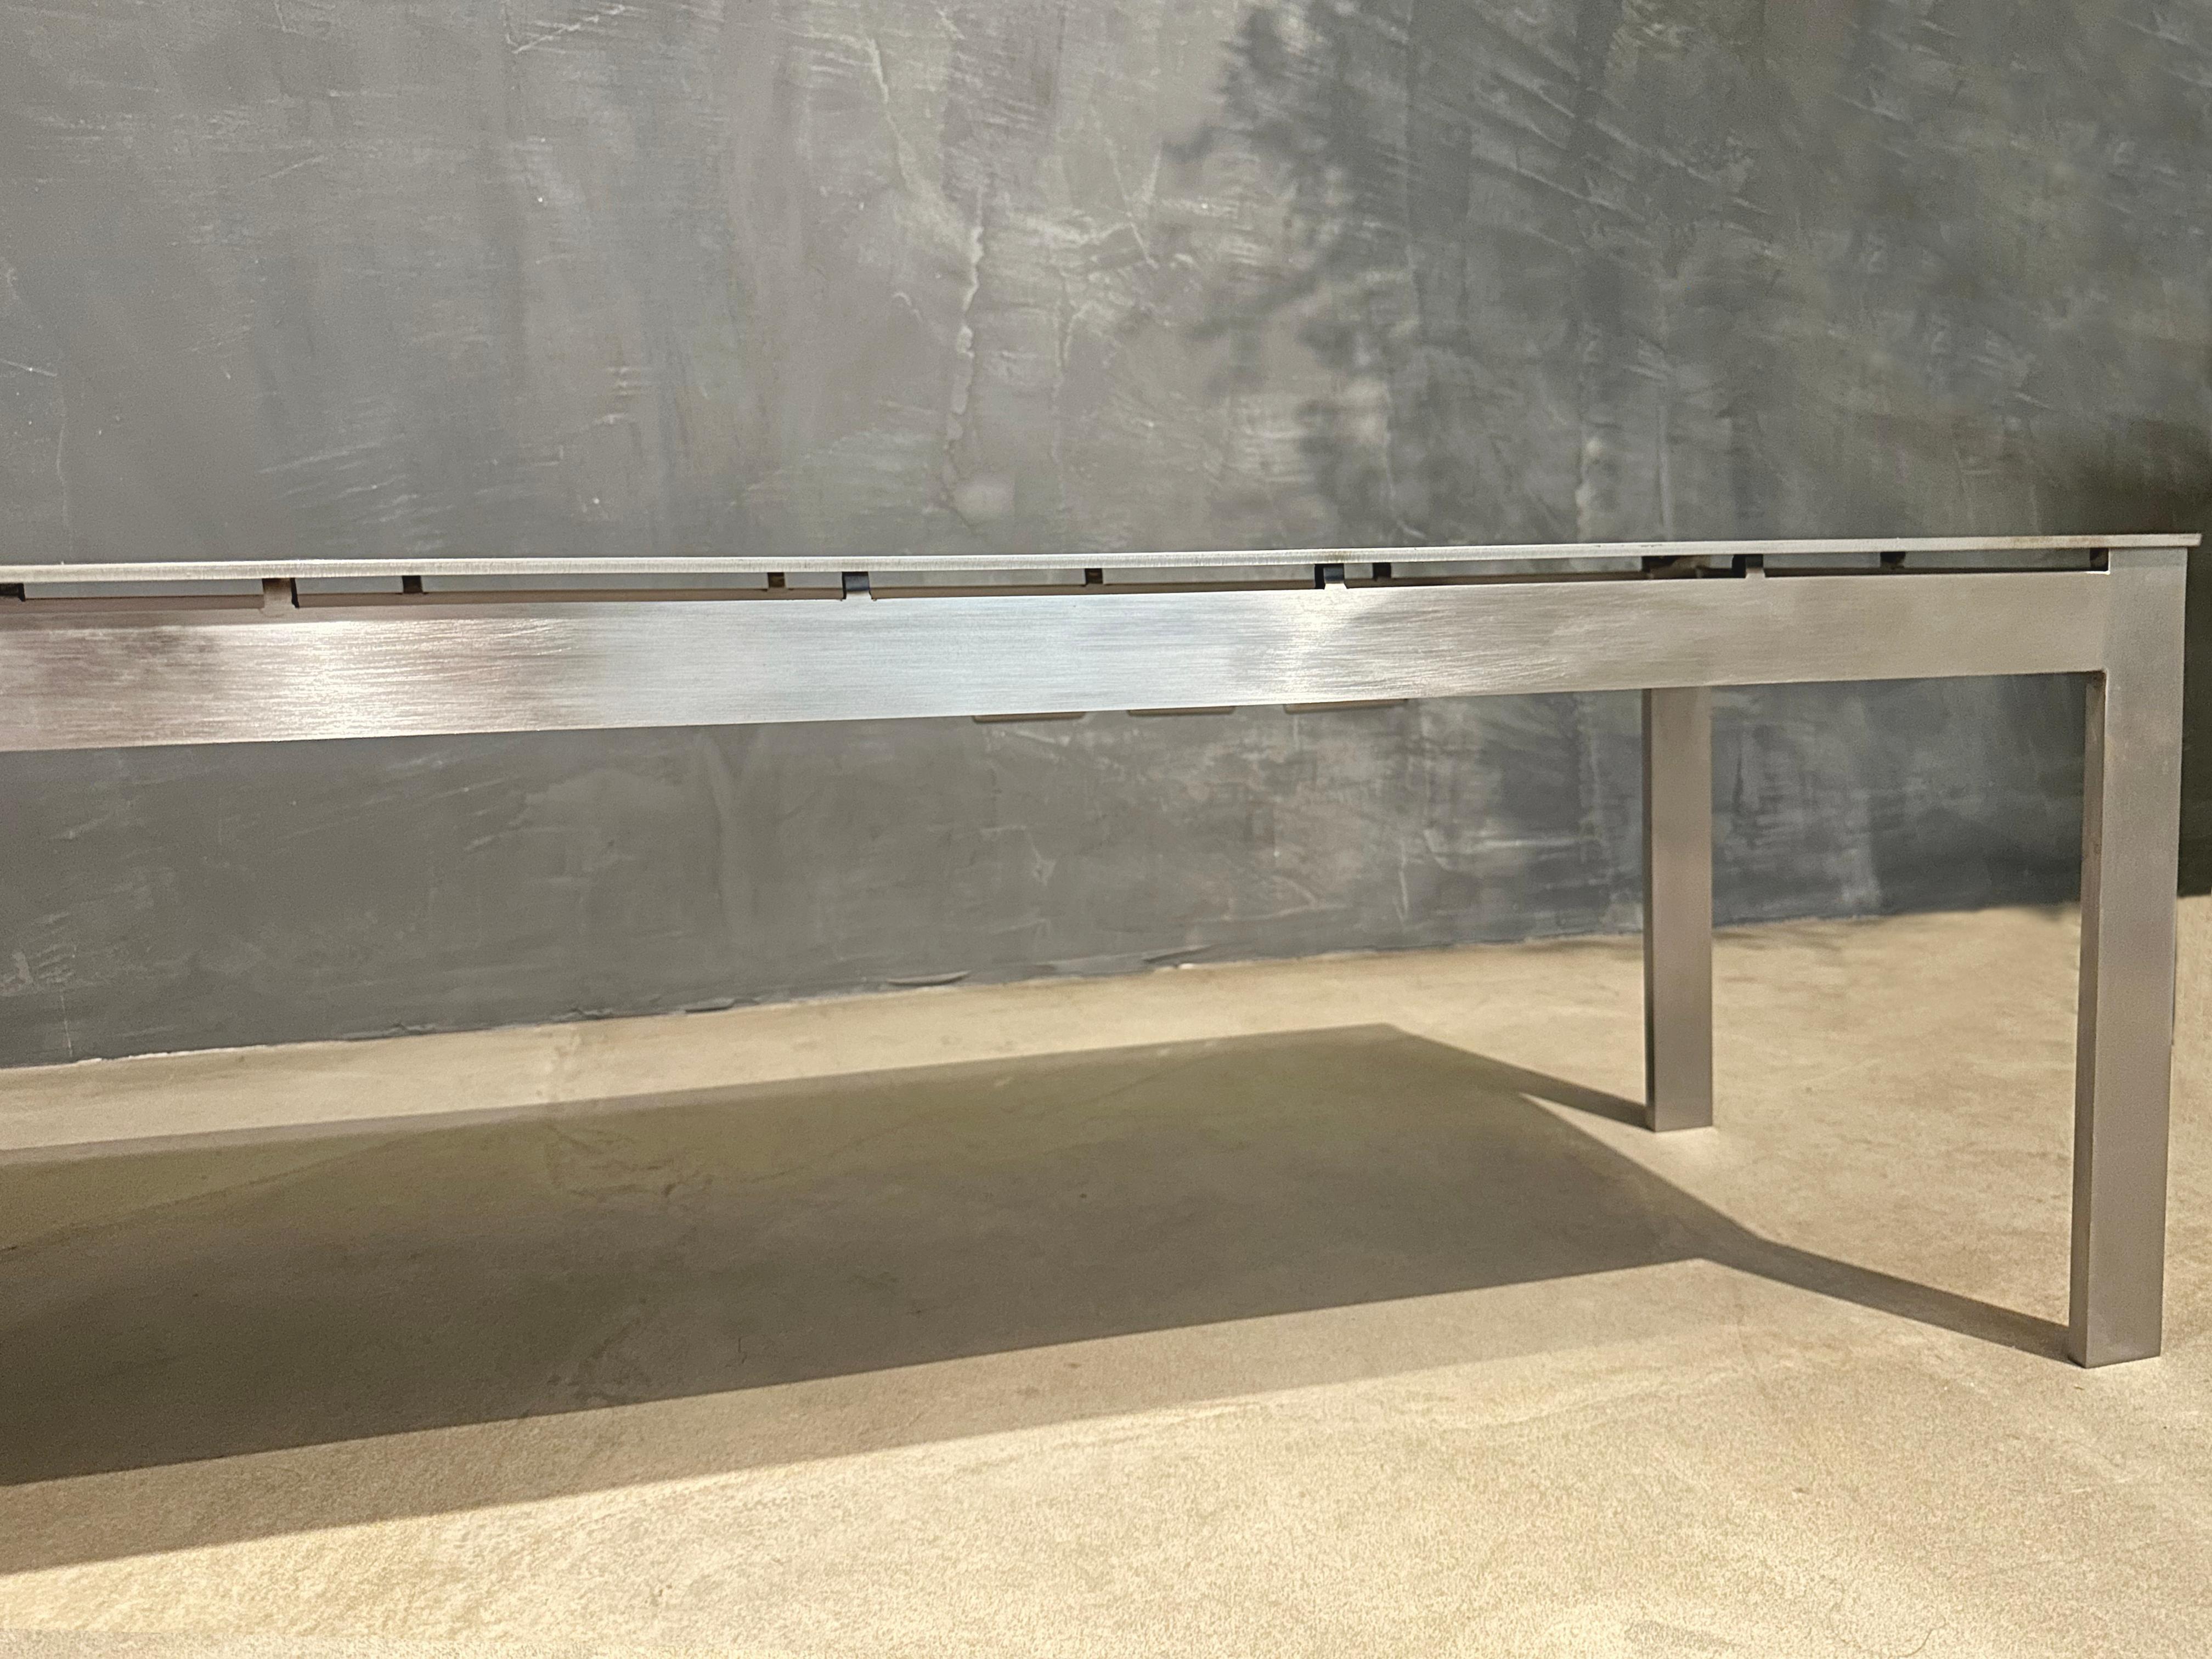 “Big Iron” Bench, Iron, JAMES VINCENT MILANO, Italy, 2022

Bench. Floating Seat.
Polished and brushed iron.
Engraved logo plaque in satiated brass.
Handcrafted in Cantù, Italy.

Height: 44 cm 
Width: 180cm
Depth: 40cm

Each piece is